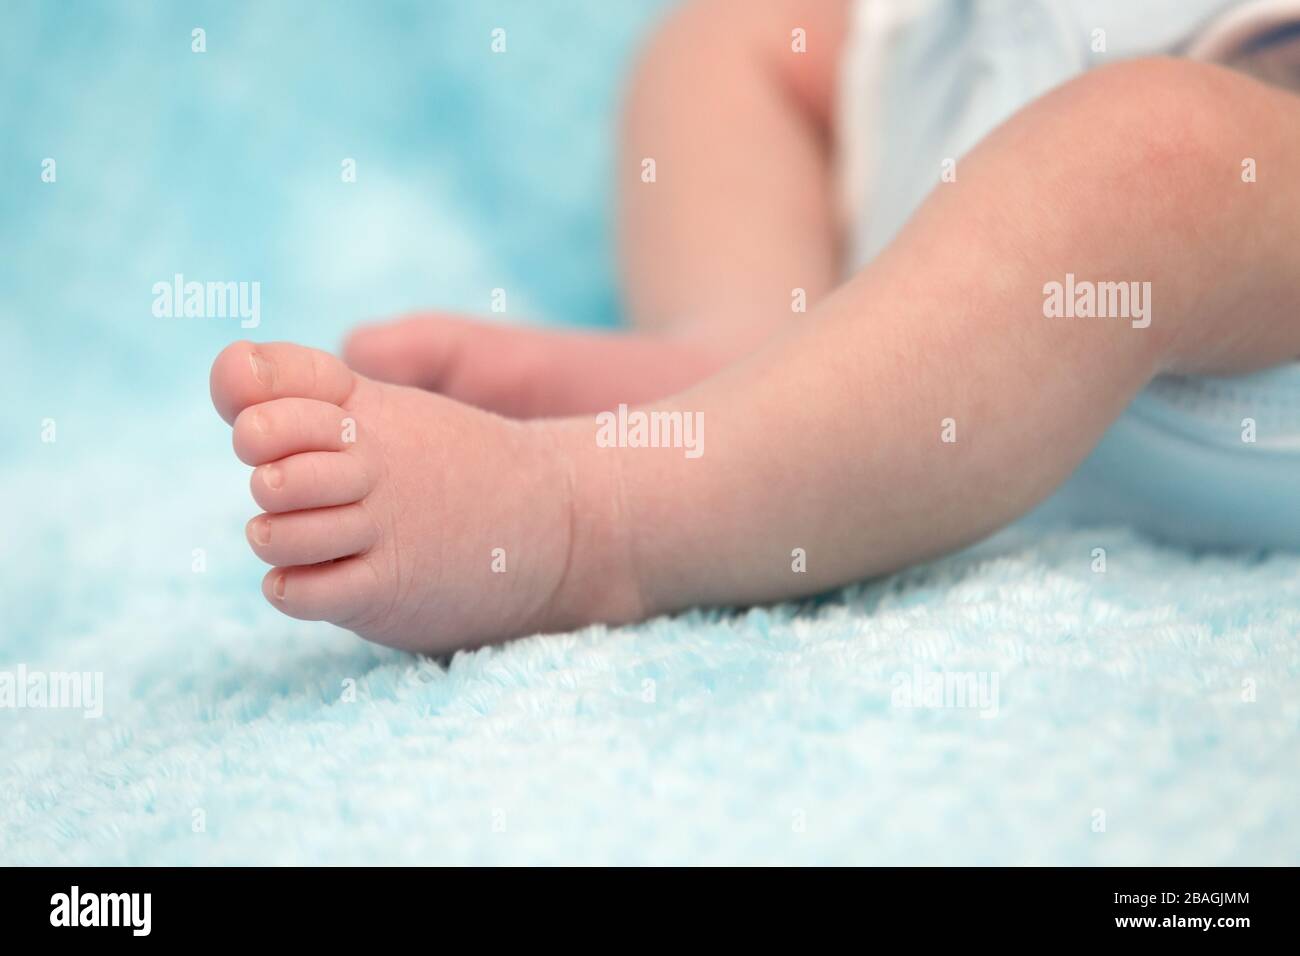 Adorable Little Baby Feet Closeup on Soft Blue Background Stock Photo